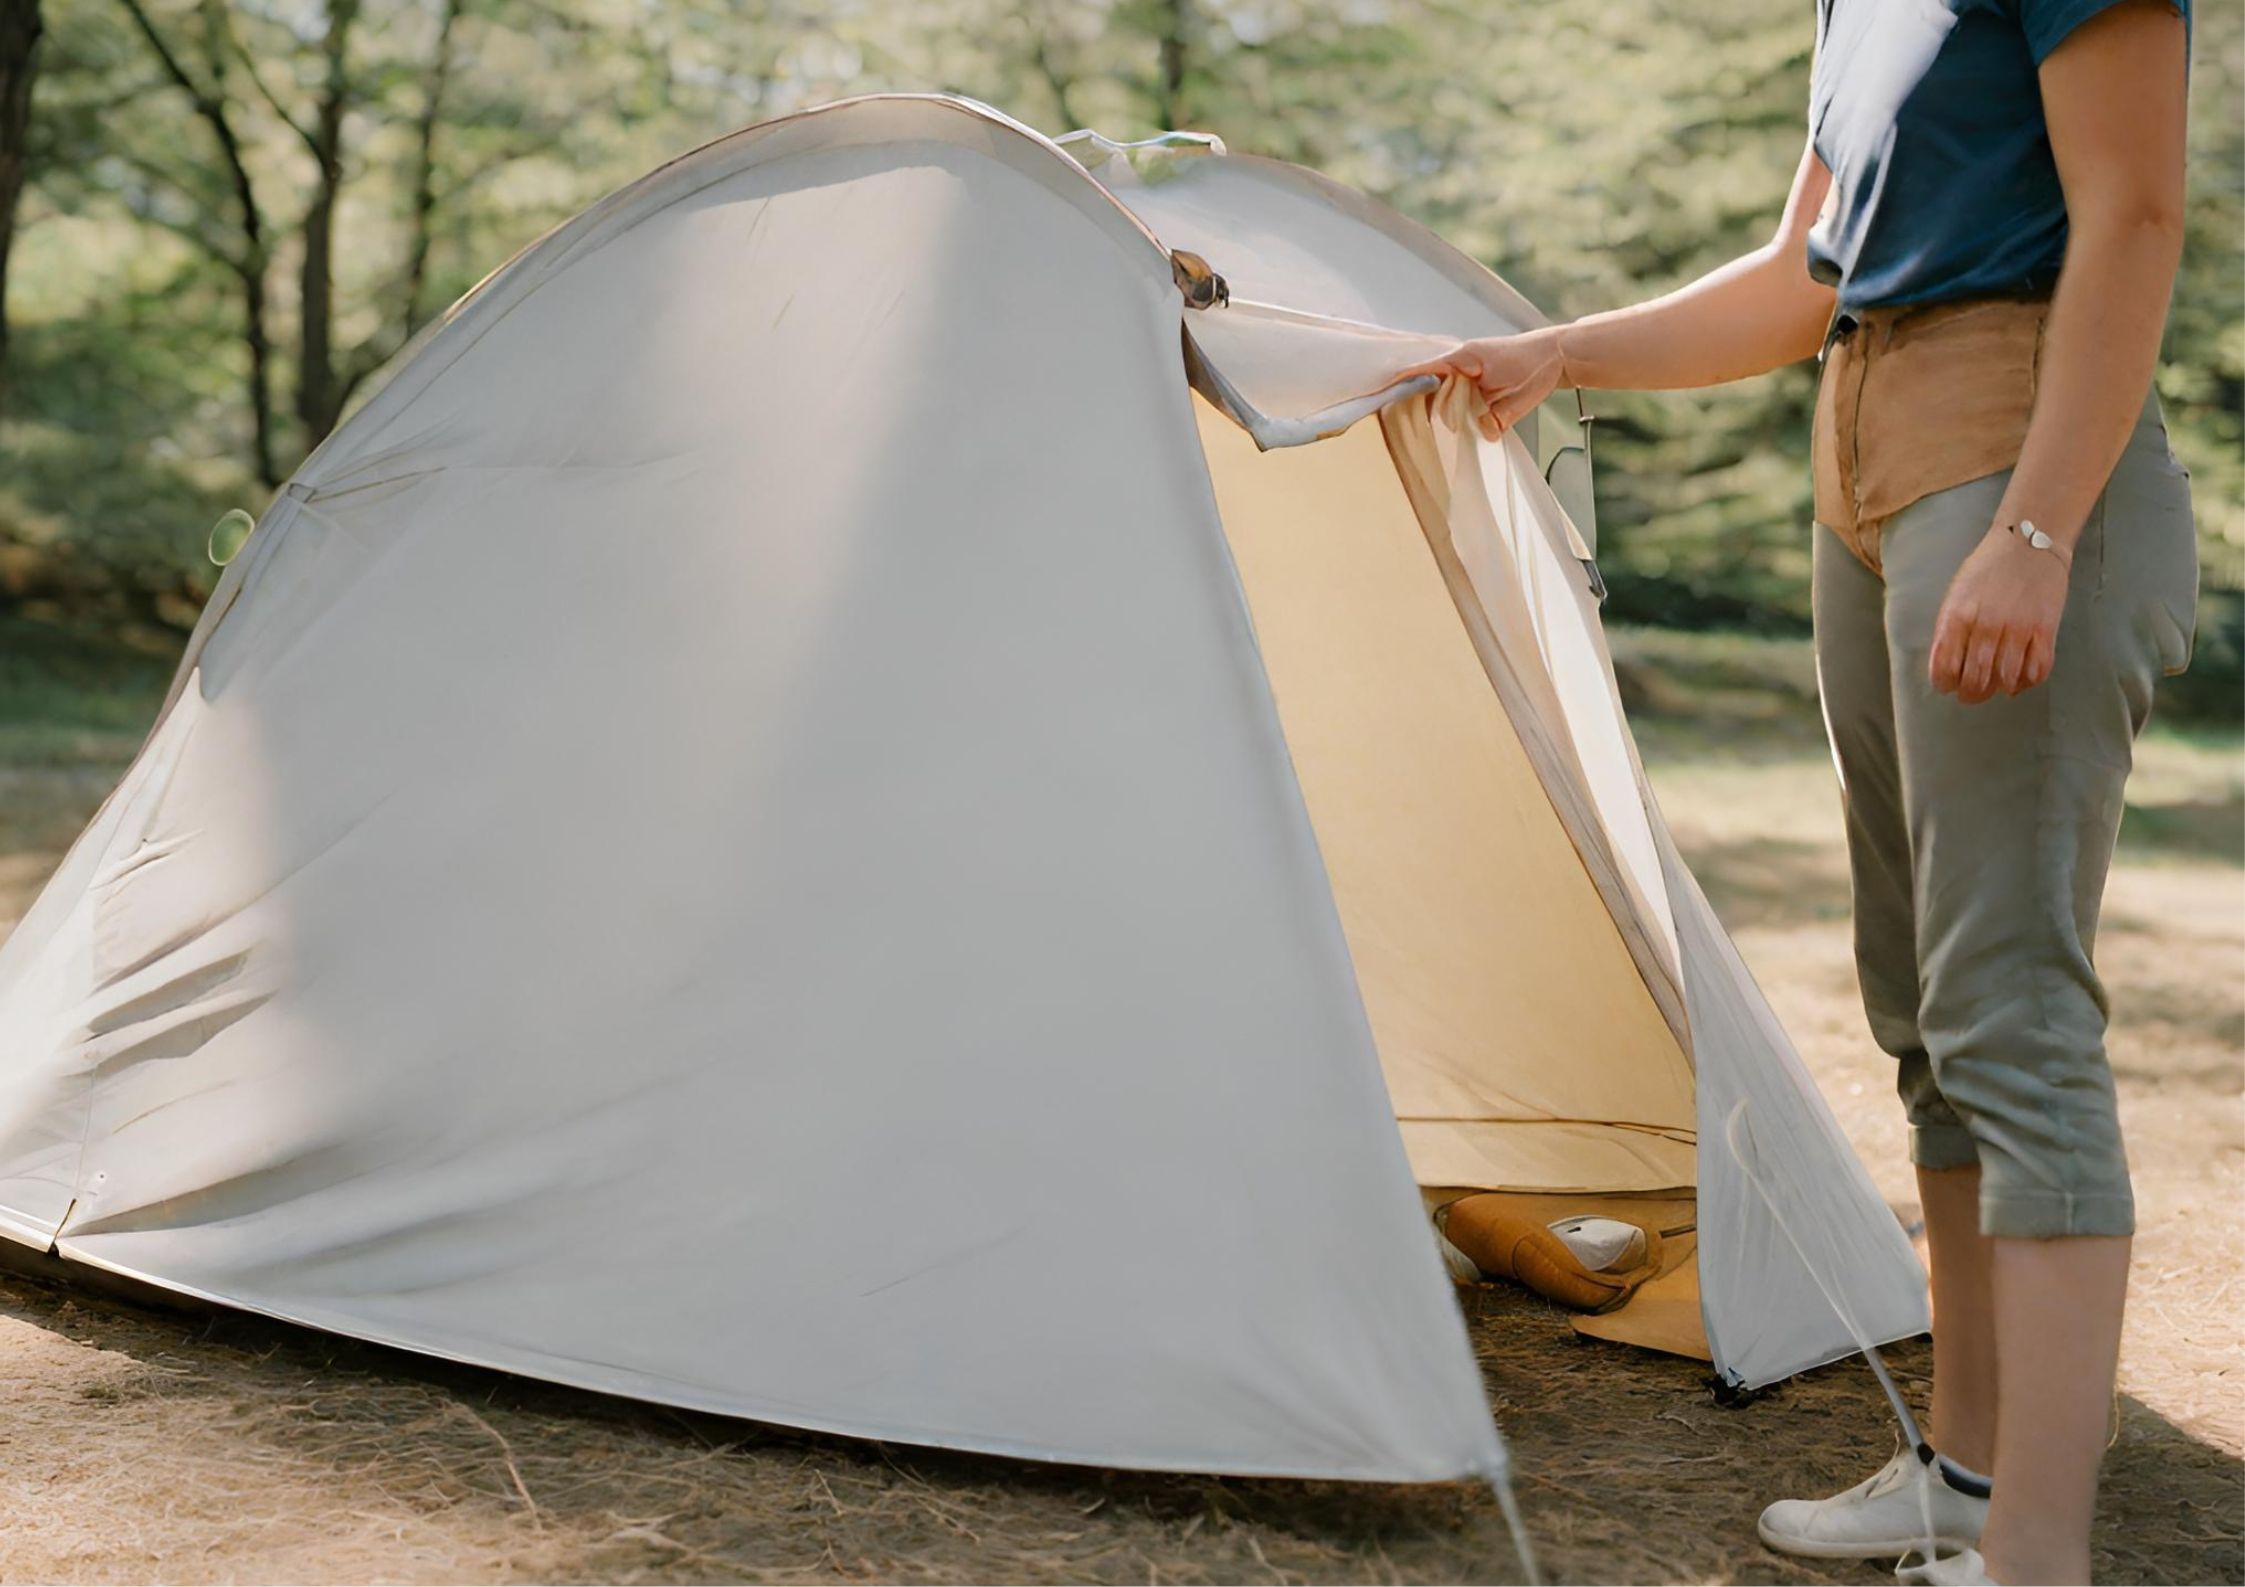 How to Close a Pop-Up Tent